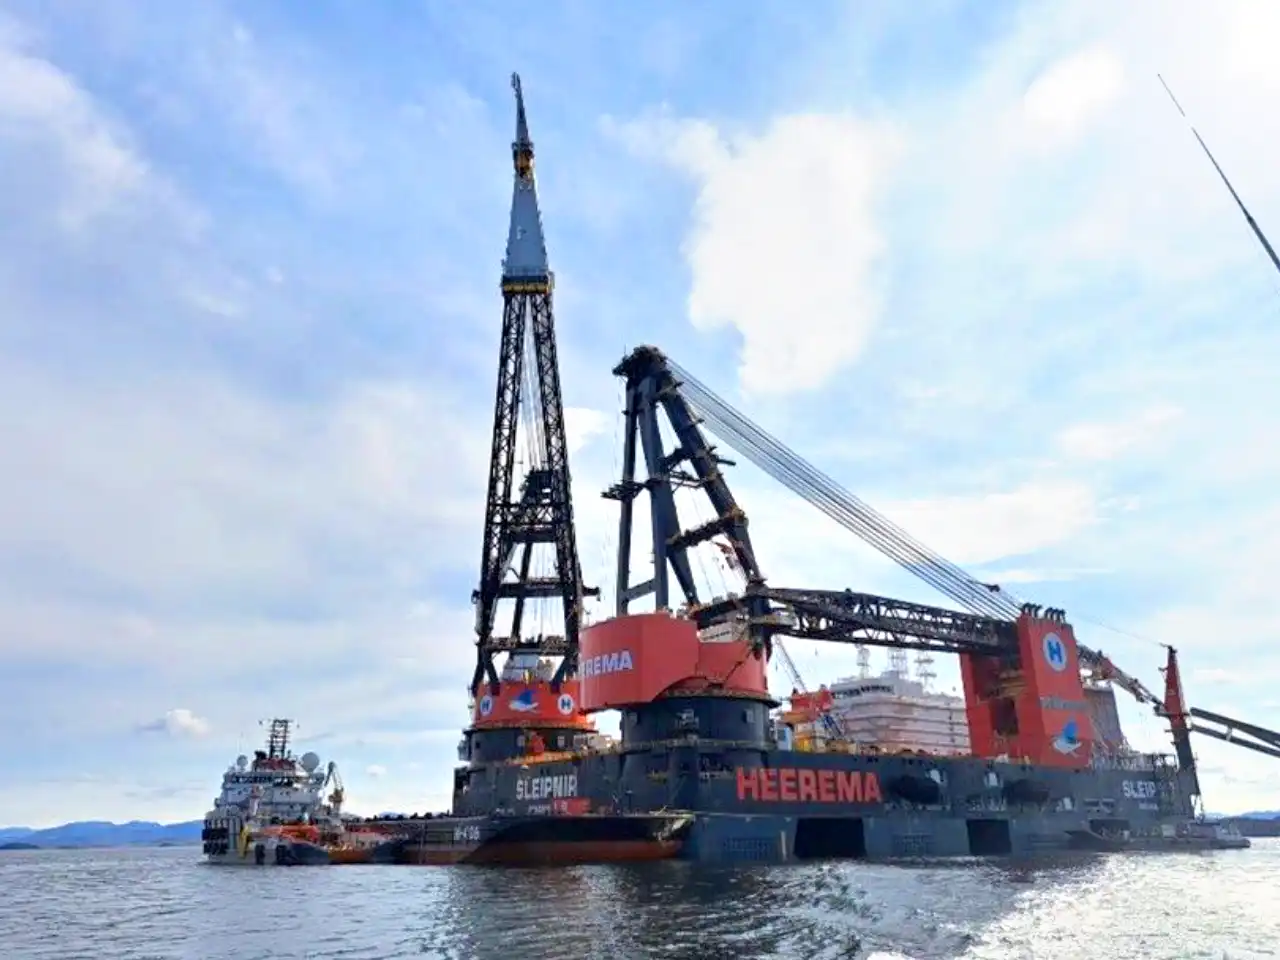 Oceanmax installed on one of the world's largest floating cranes